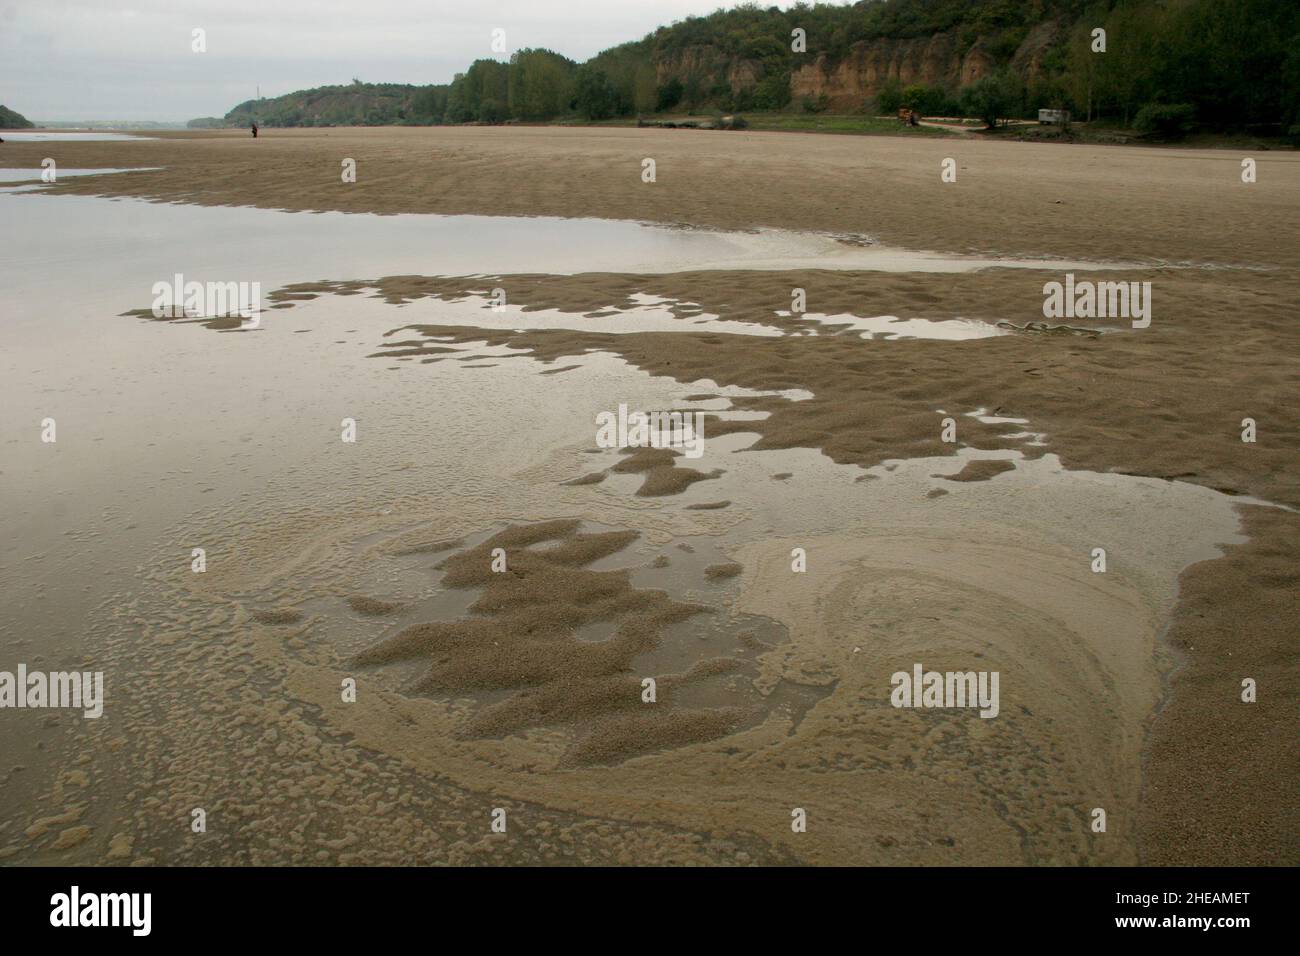 The Danube River has dried up, a river arm from the city of Ruse. The bottom of the Danube River Stock Photo